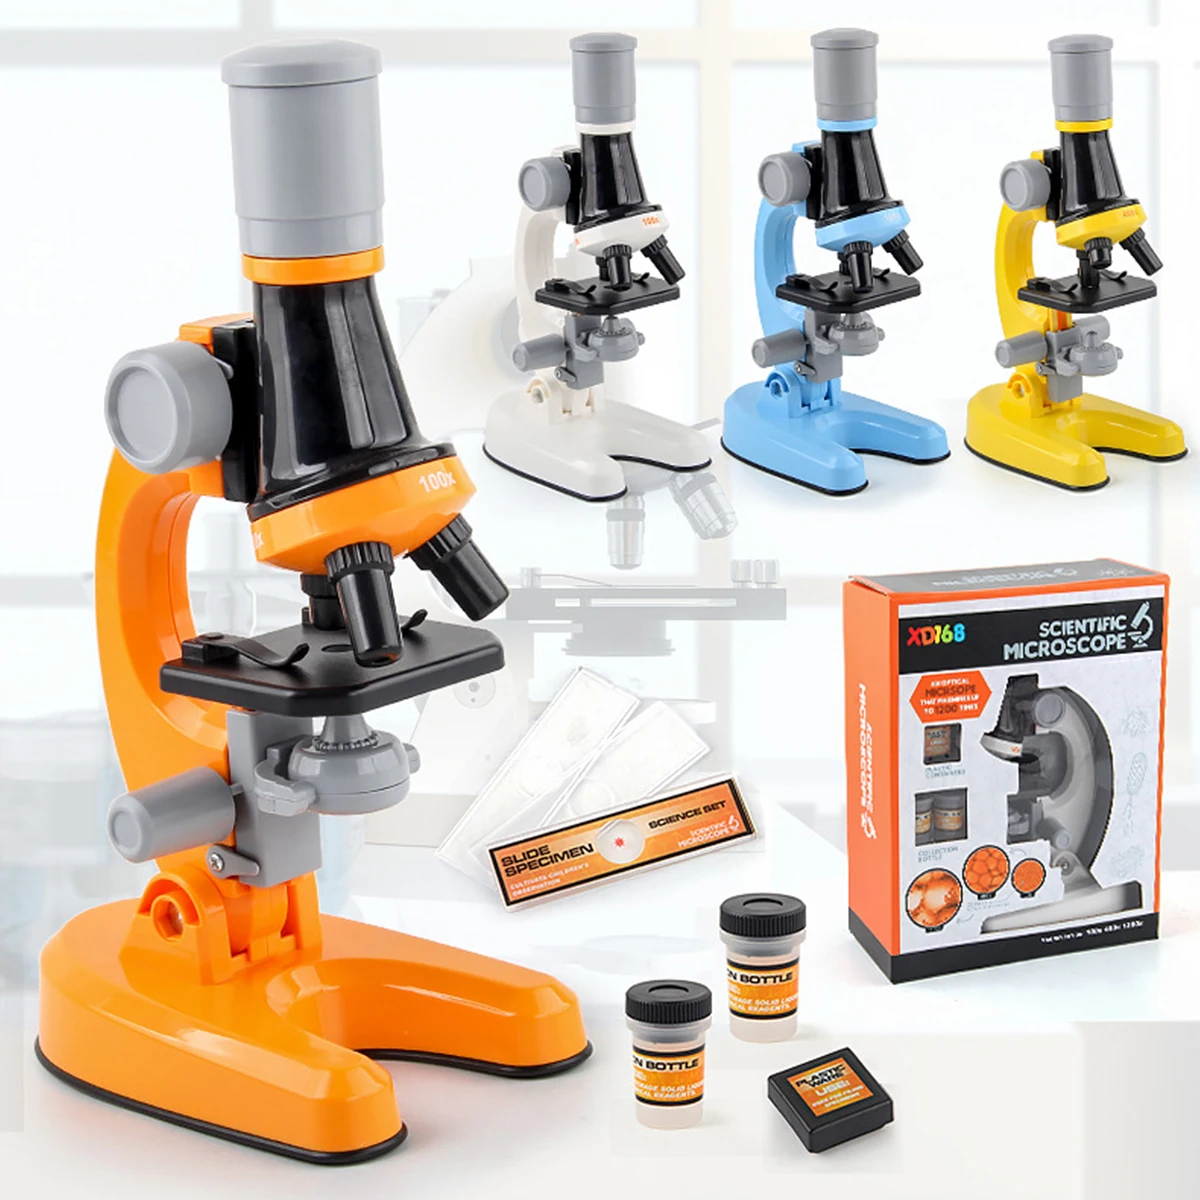 

Microscope Toy Kit LabelLed 100X-400X-1200X Home School Educational Toy Gift Refined Biological With Retail Box For Kids Child